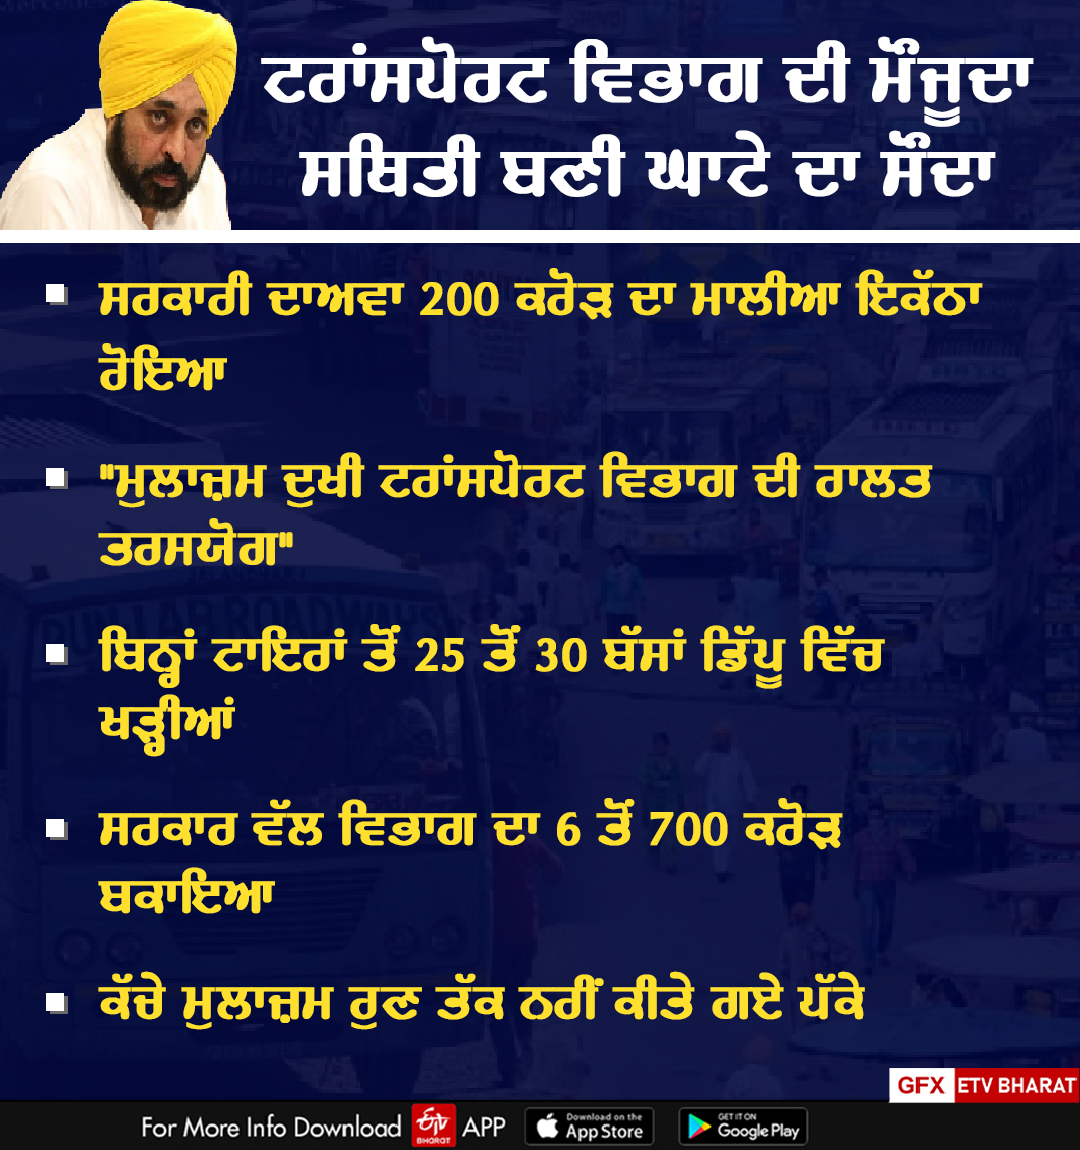 The Punjab government will help to provide private buses to the youth